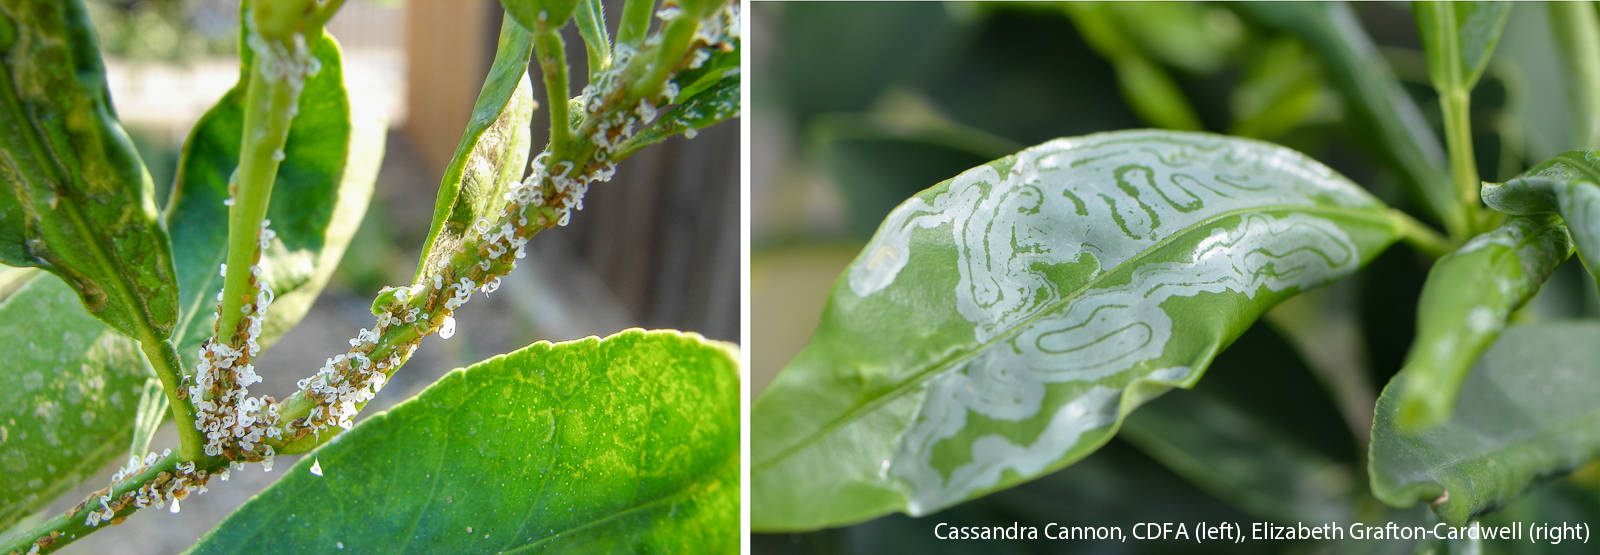 Asian citrus psyllid nymphs (left) and citrus leafminer damage (right).